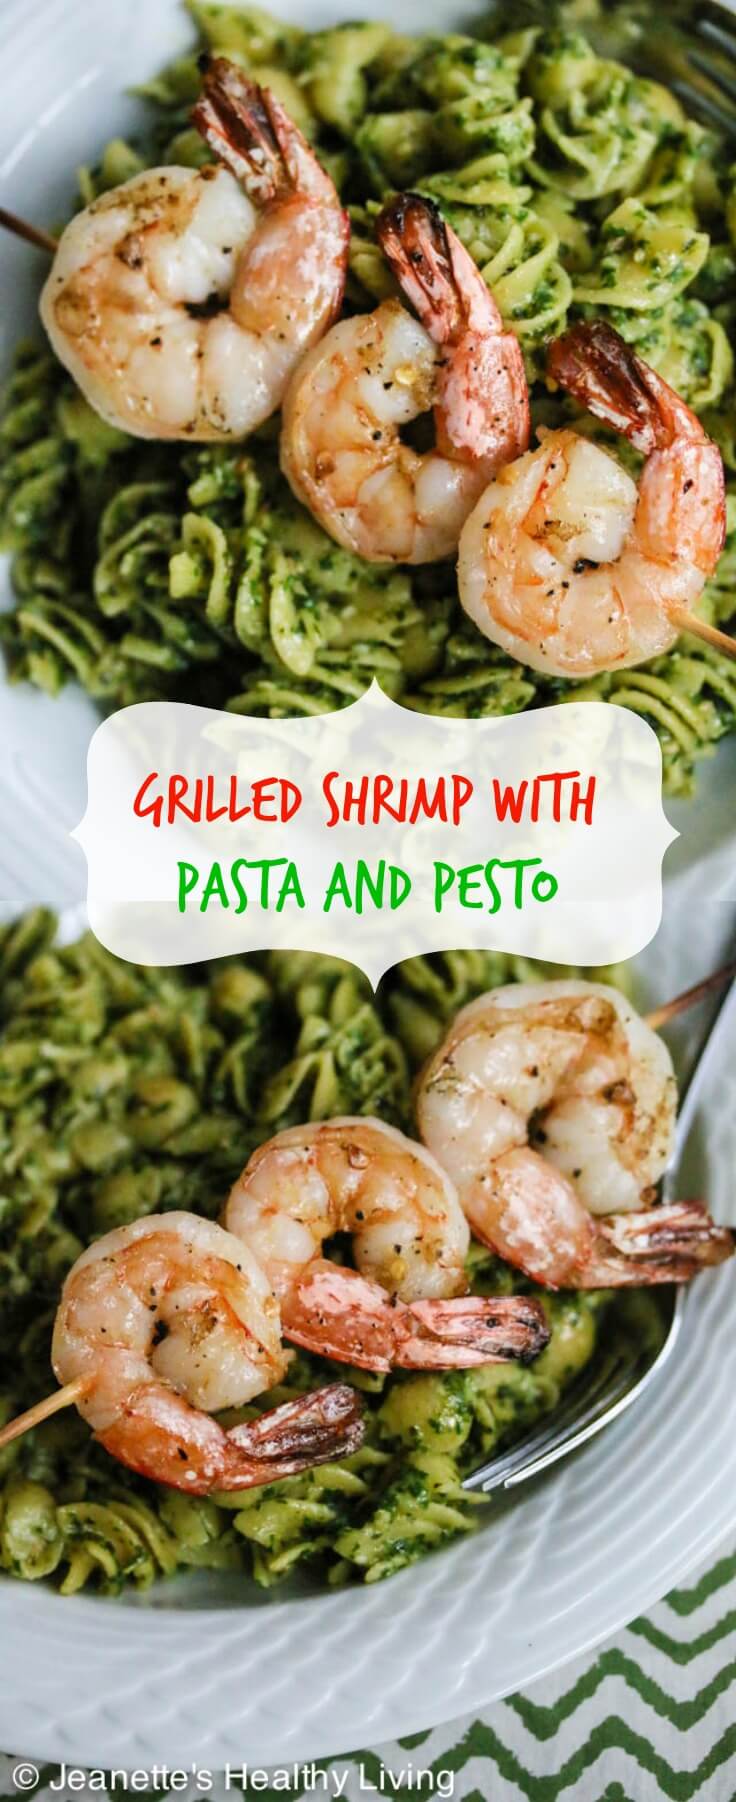 Grilled Chili Garlic Shrimp with Pesto Pasta - this easy, delicious and healthy meal takes just 30 minutes to make